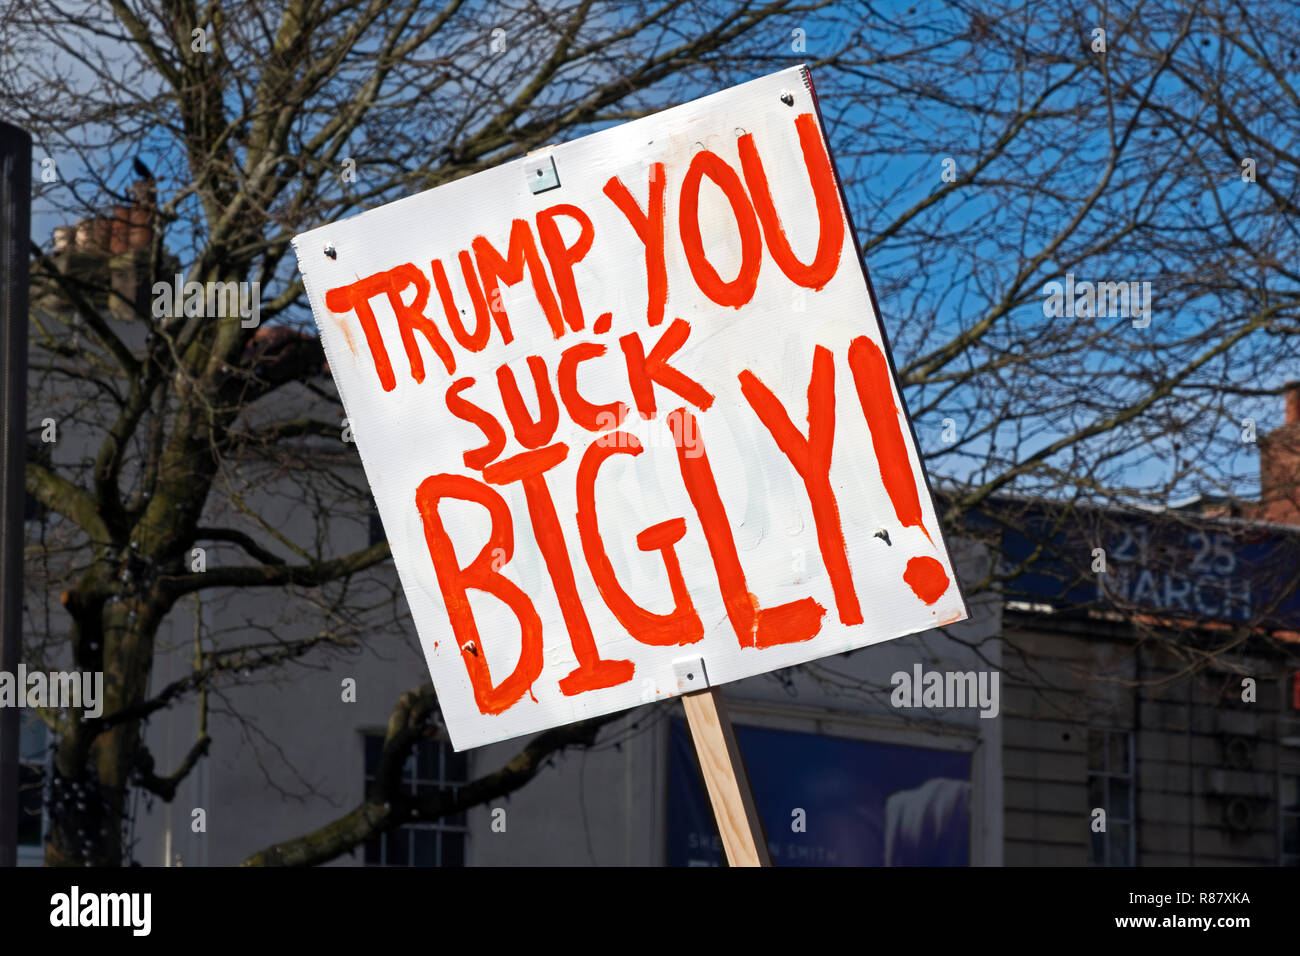 A placard with the slogan “TRUMP, YOU SUCK BIGLY!” at a demonstration against US president Donald Trump’s immigration policies on 4 February 2017.. Stock Photo